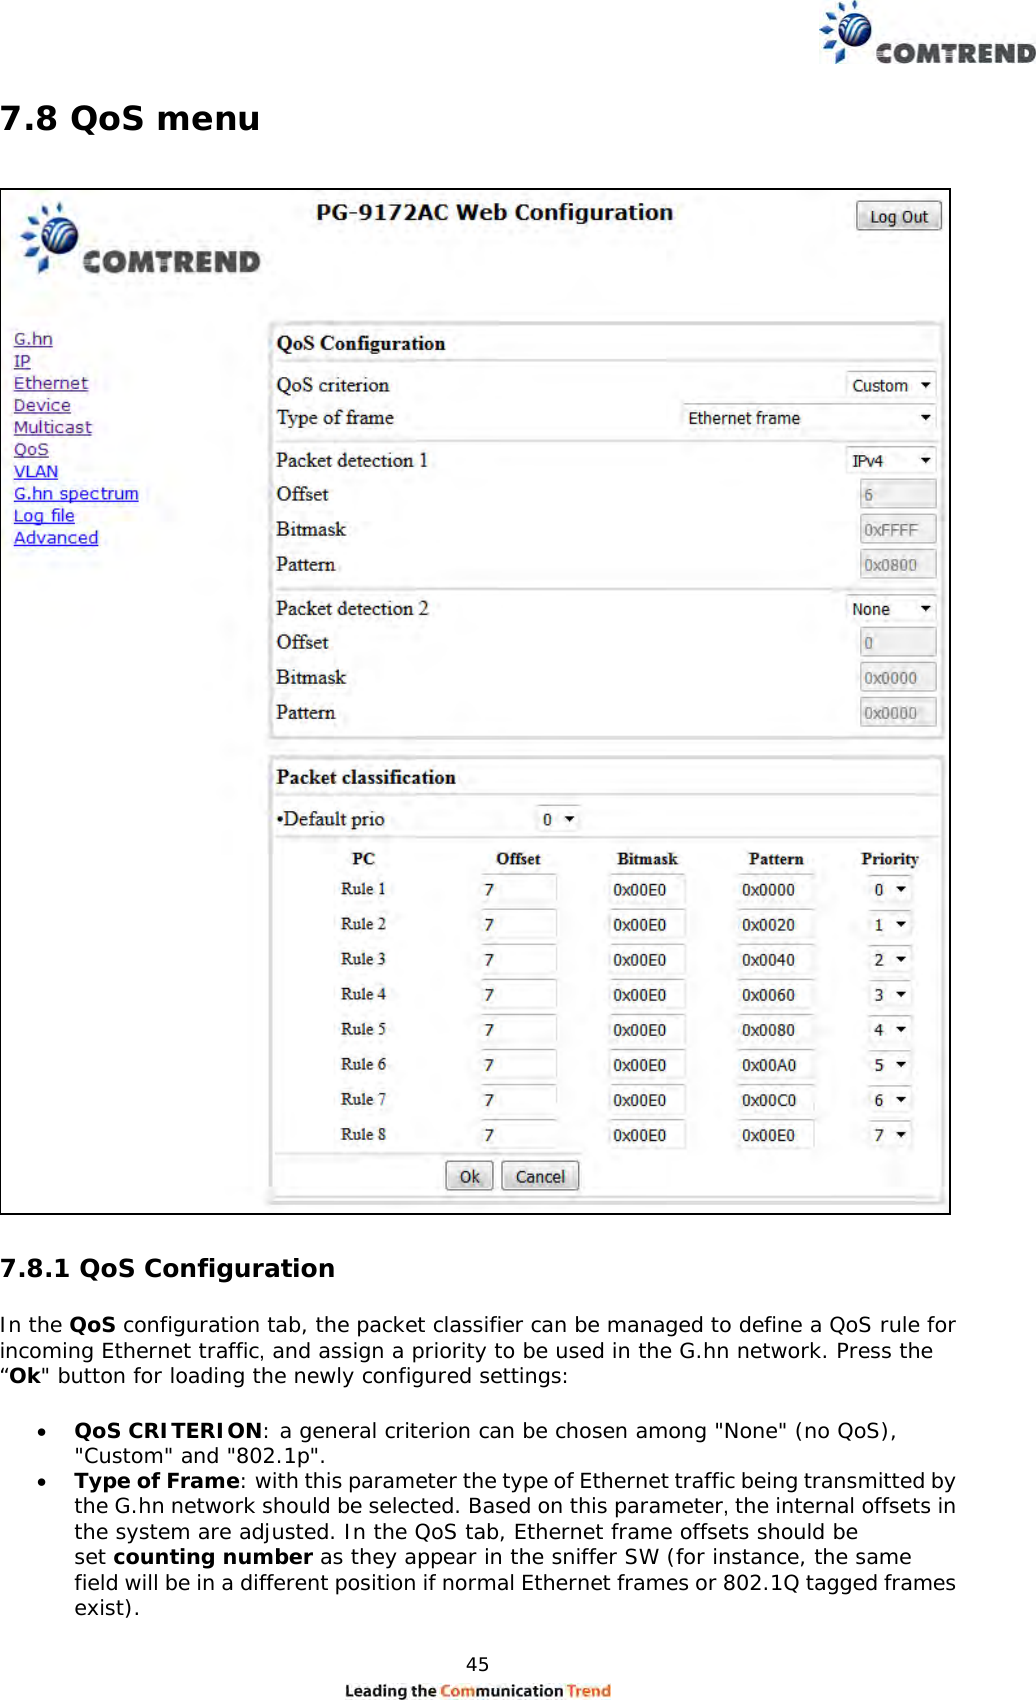  45  7.8 QoS menu   7.8.1 QoS Configuration  In the QoS configuration tab, the packet classifier can be managed to define a QoS rule for incoming Ethernet traffic, and assign a priority to be used in the G.hn network. Press the “Ok&quot; button for loading the newly configured settings:   QoS CRITERION: a general criterion can be chosen among &quot;None&quot; (no QoS), &quot;Custom&quot; and &quot;802.1p&quot;.   Type of Frame: with this parameter the type of Ethernet traffic being transmitted by the G.hn network should be selected. Based on this parameter, the internal offsets in the system are adjusted. In the QoS tab, Ethernet frame offsets should be set counting number as they appear in the sniffer SW (for instance, the same field will be in a different position if normal Ethernet frames or 802.1Q tagged frames exist).  